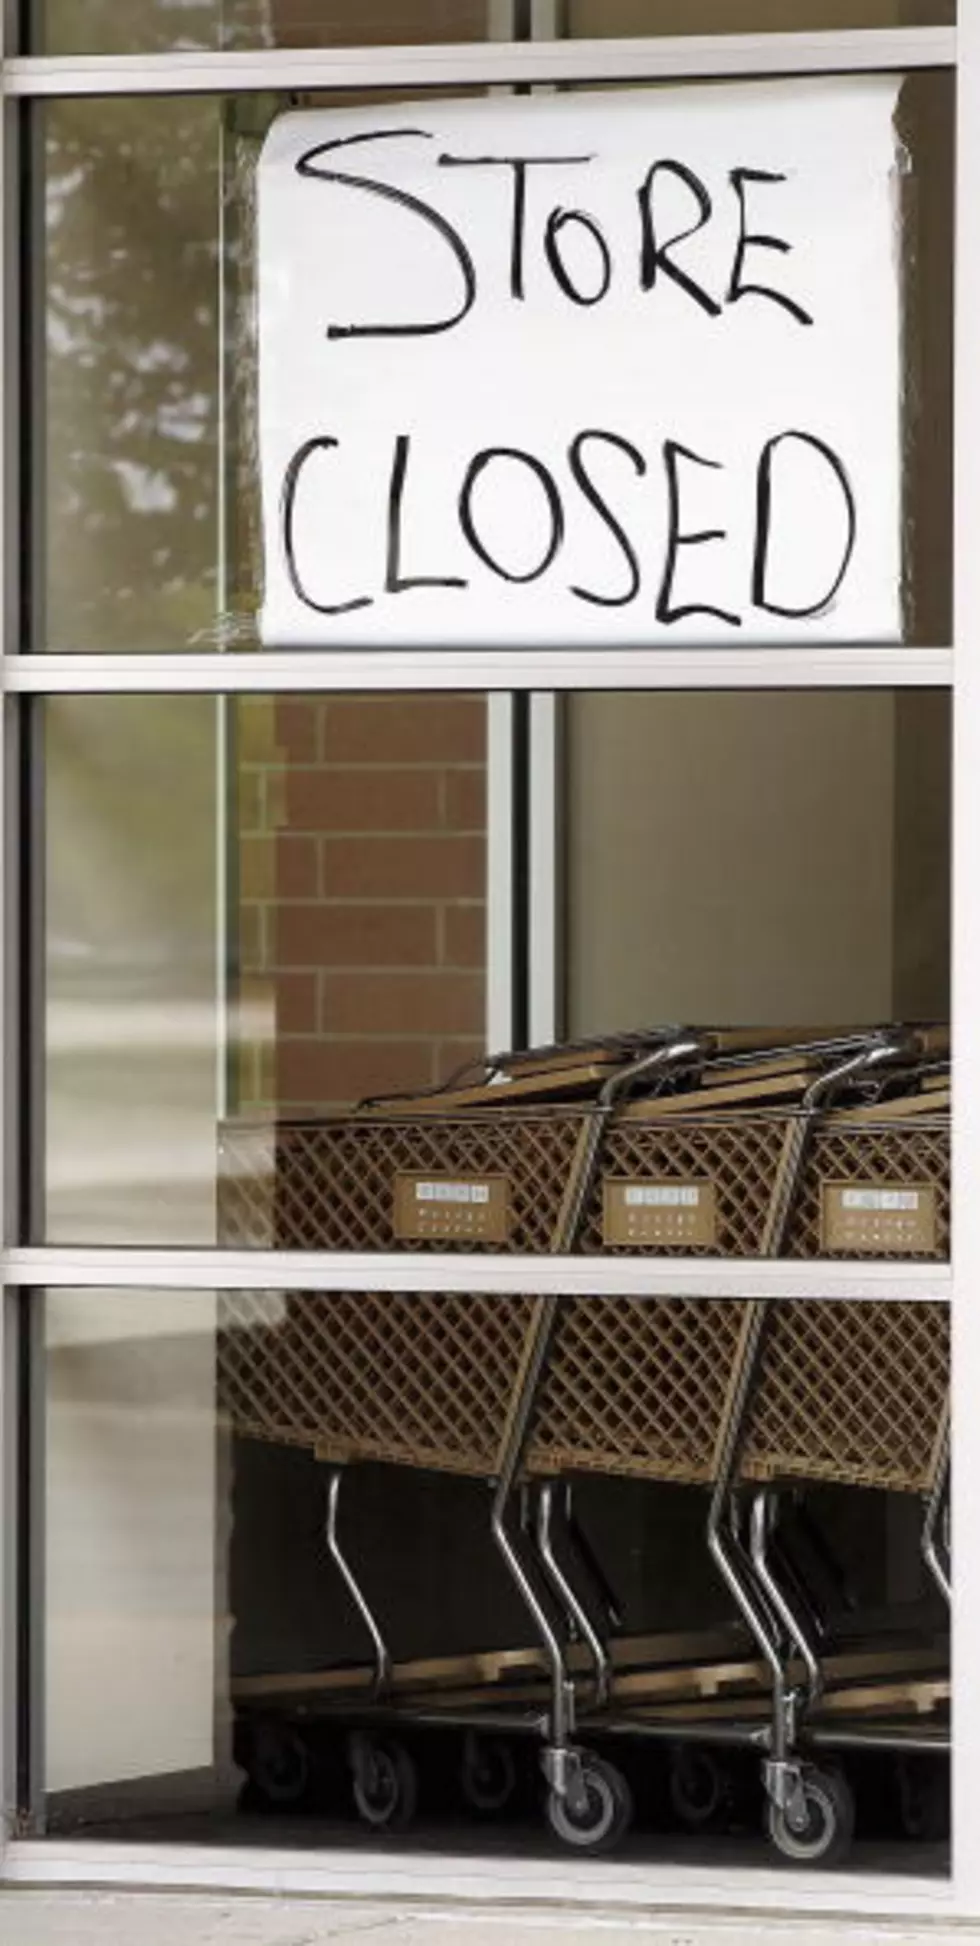 Local Clothing Store Closed Sunday